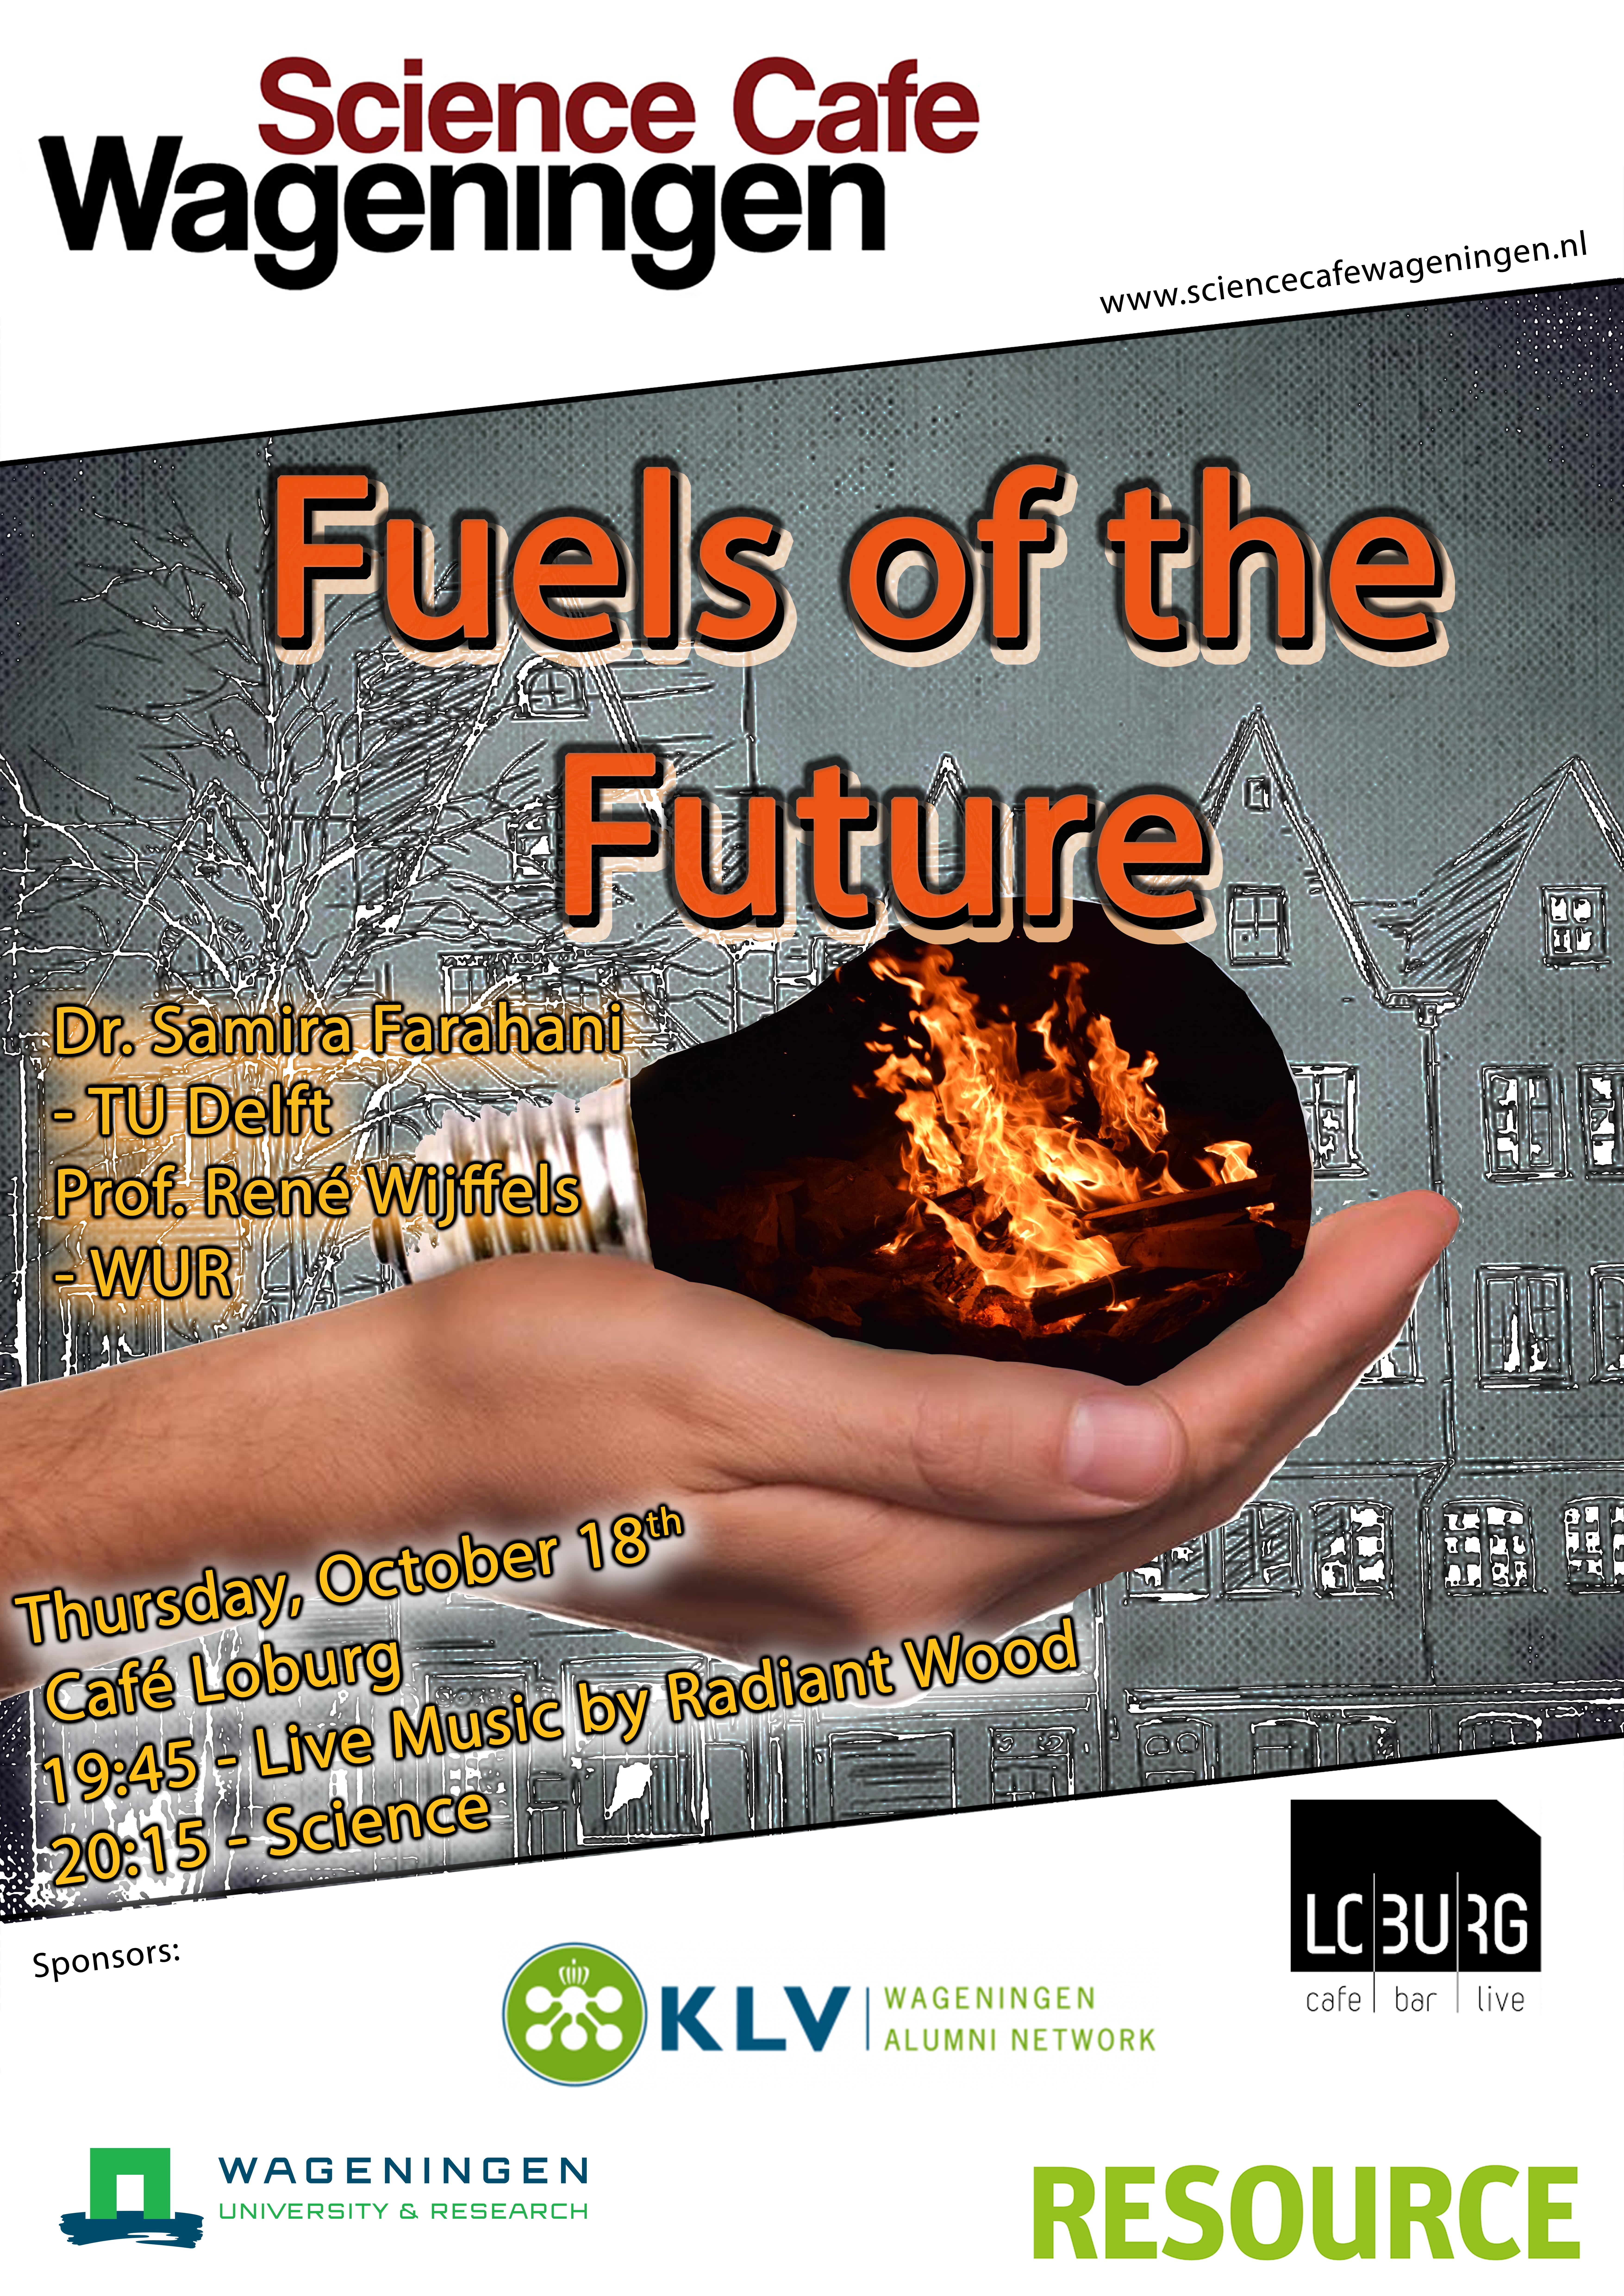 Fuels of the Future